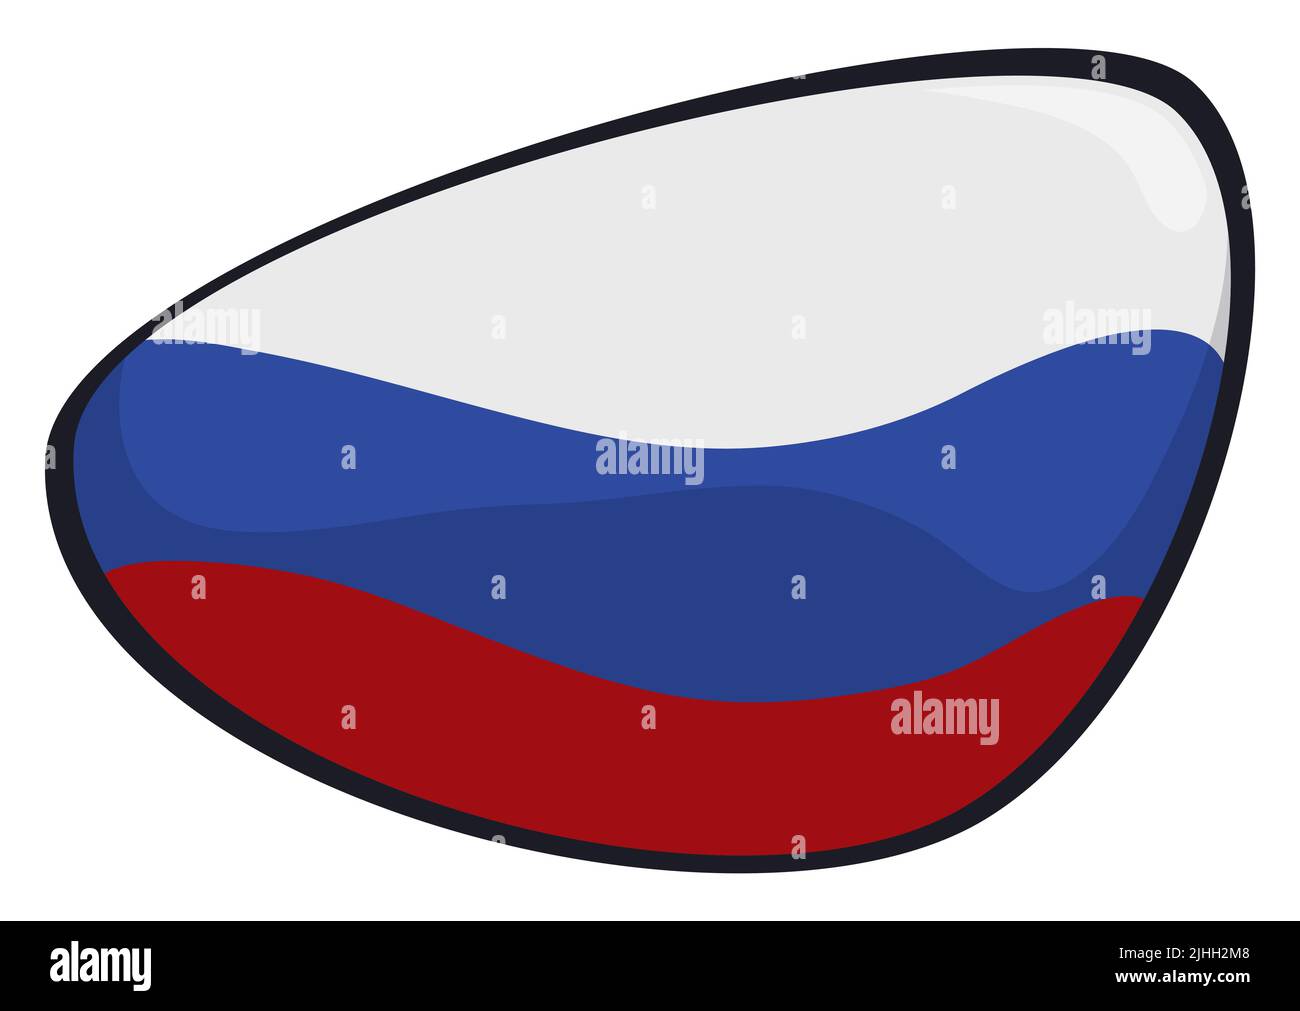 Template with irregular semi oval shape with Russian tricolor flag design inside of it. Stock Vector